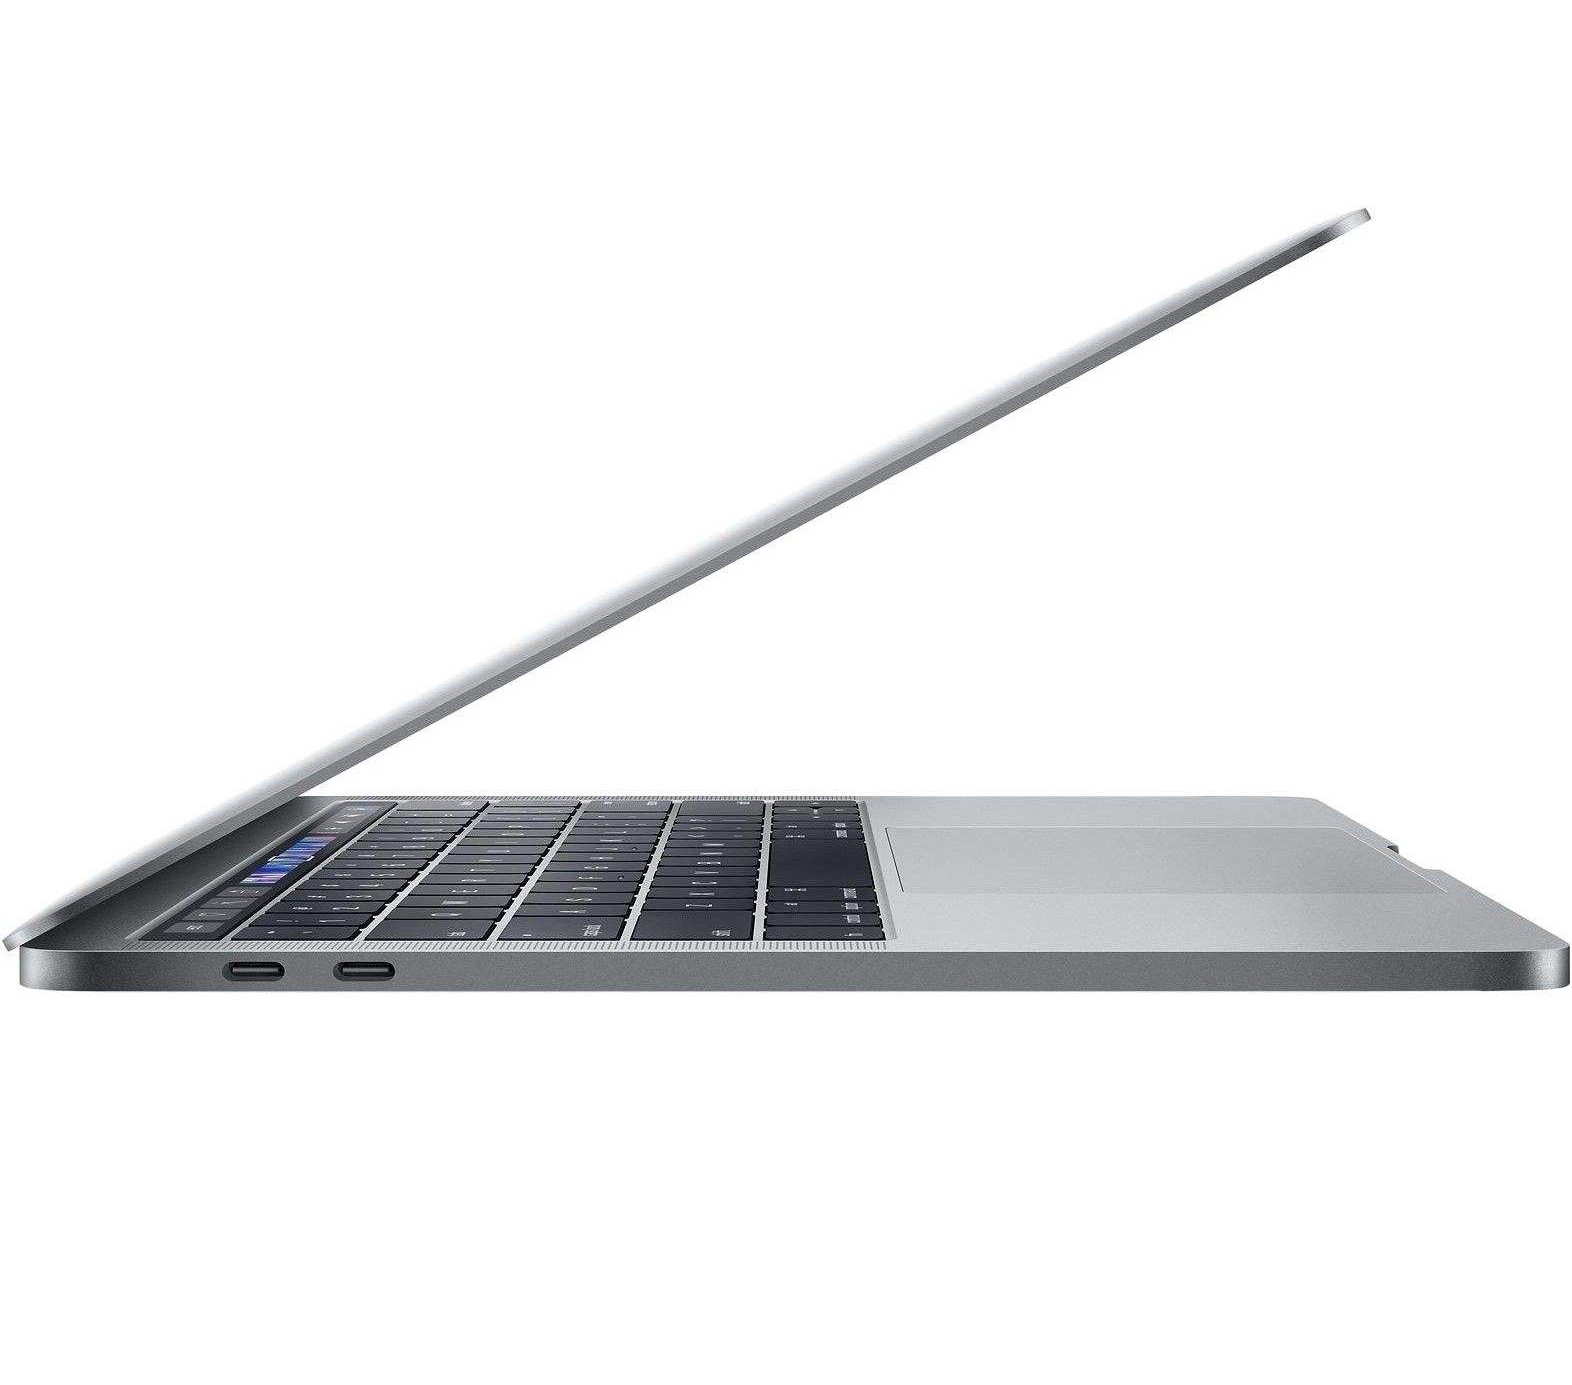 Apple MacBook Pro MUHP2 2019 - 13 inch Laptop With Touch Bar